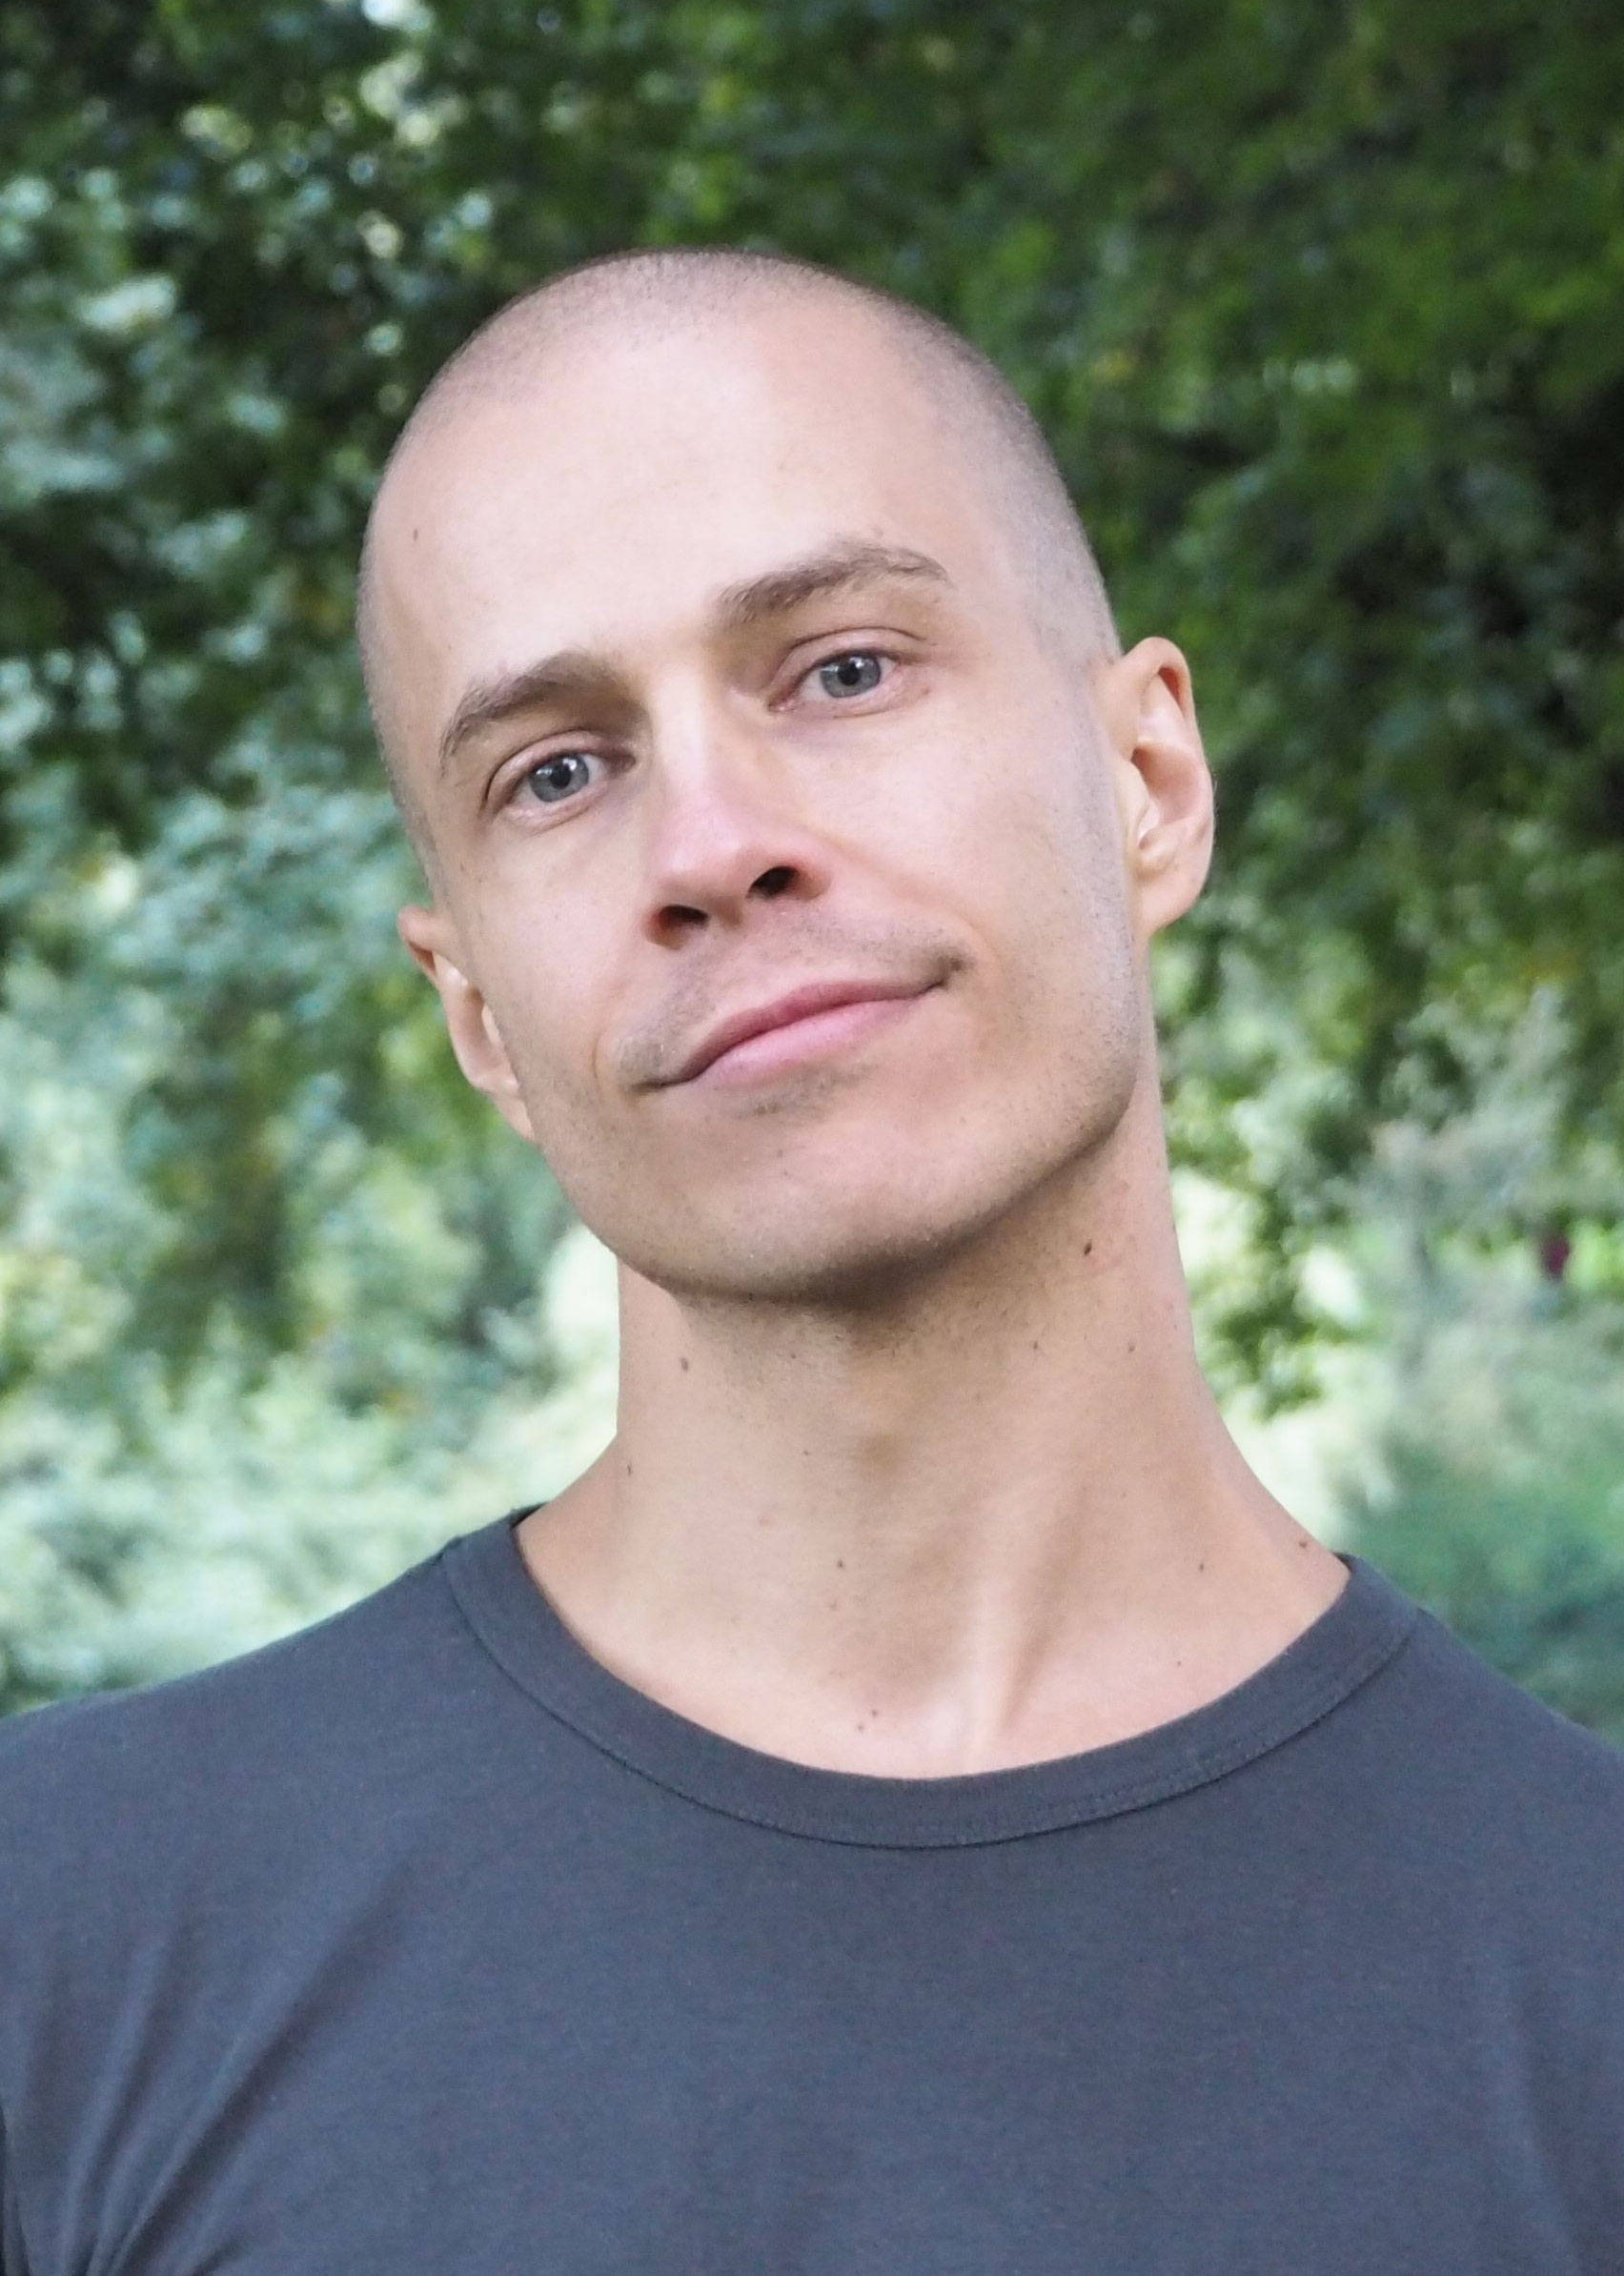 Picture of Dave Spencer, founder of Mindfulness Liverpool. Dave Spencer is one of the North-West's leading mindfulness teachers.